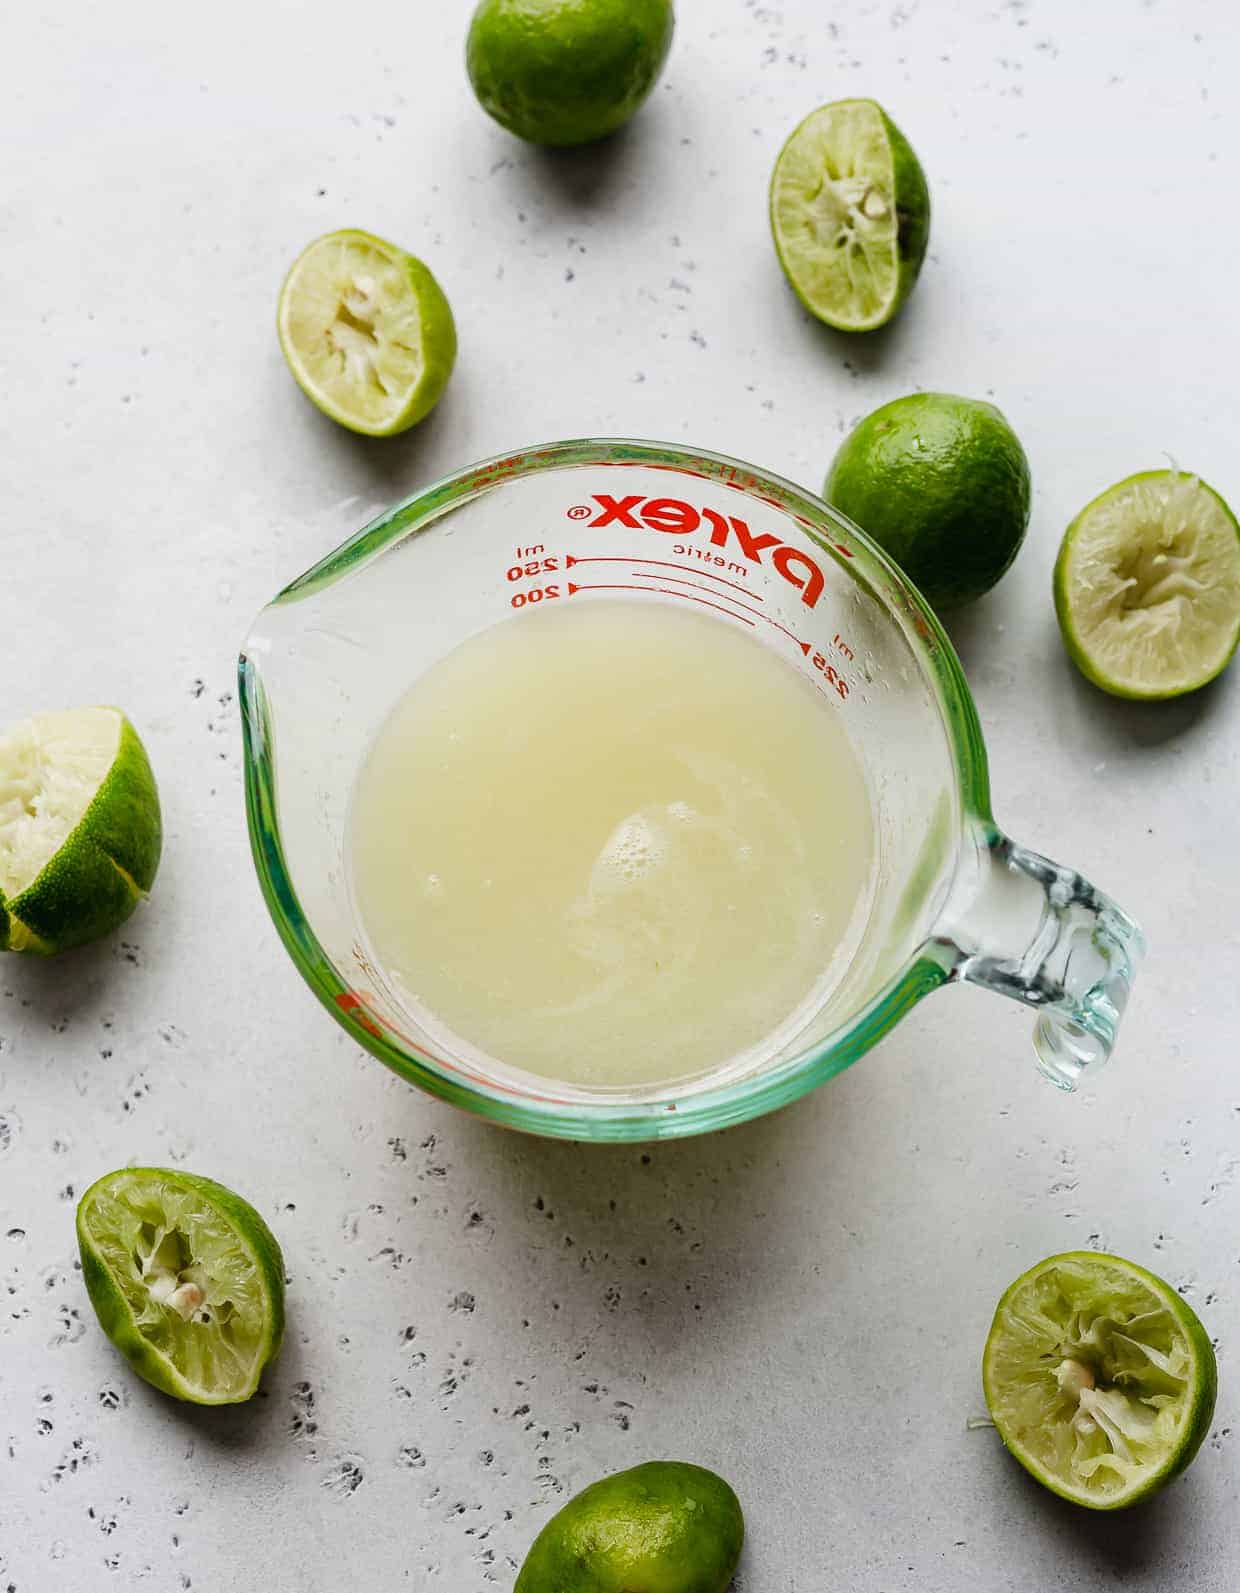 A glass measuring cup full of lime juice, surrounded by key limes.